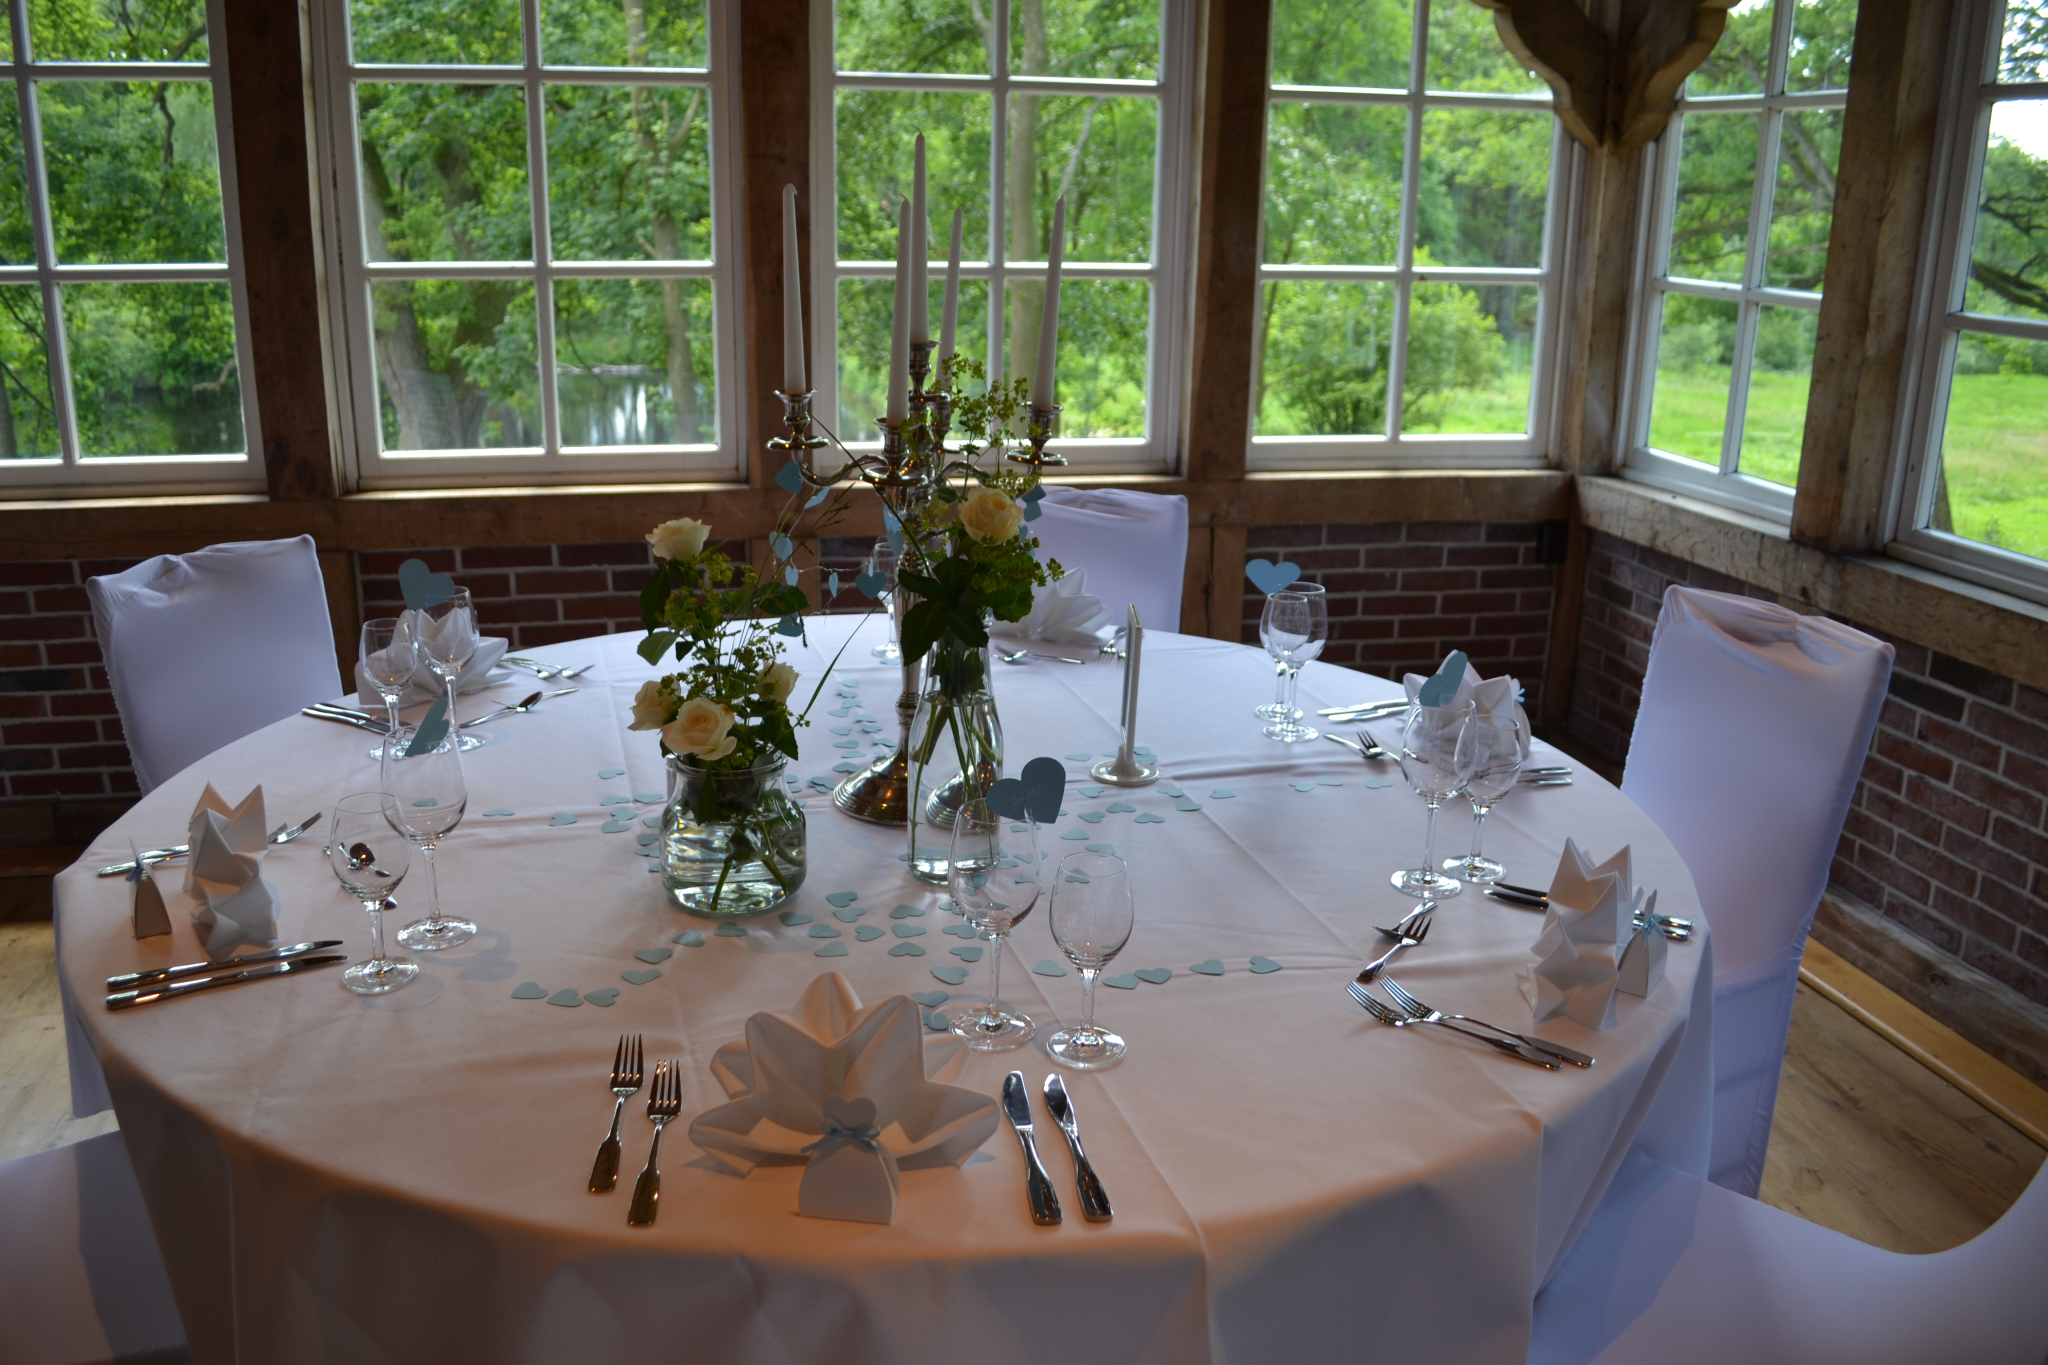 Table decoration for a wedding in white, cream and light blue | Landhaus Haverbeckhof wedding location